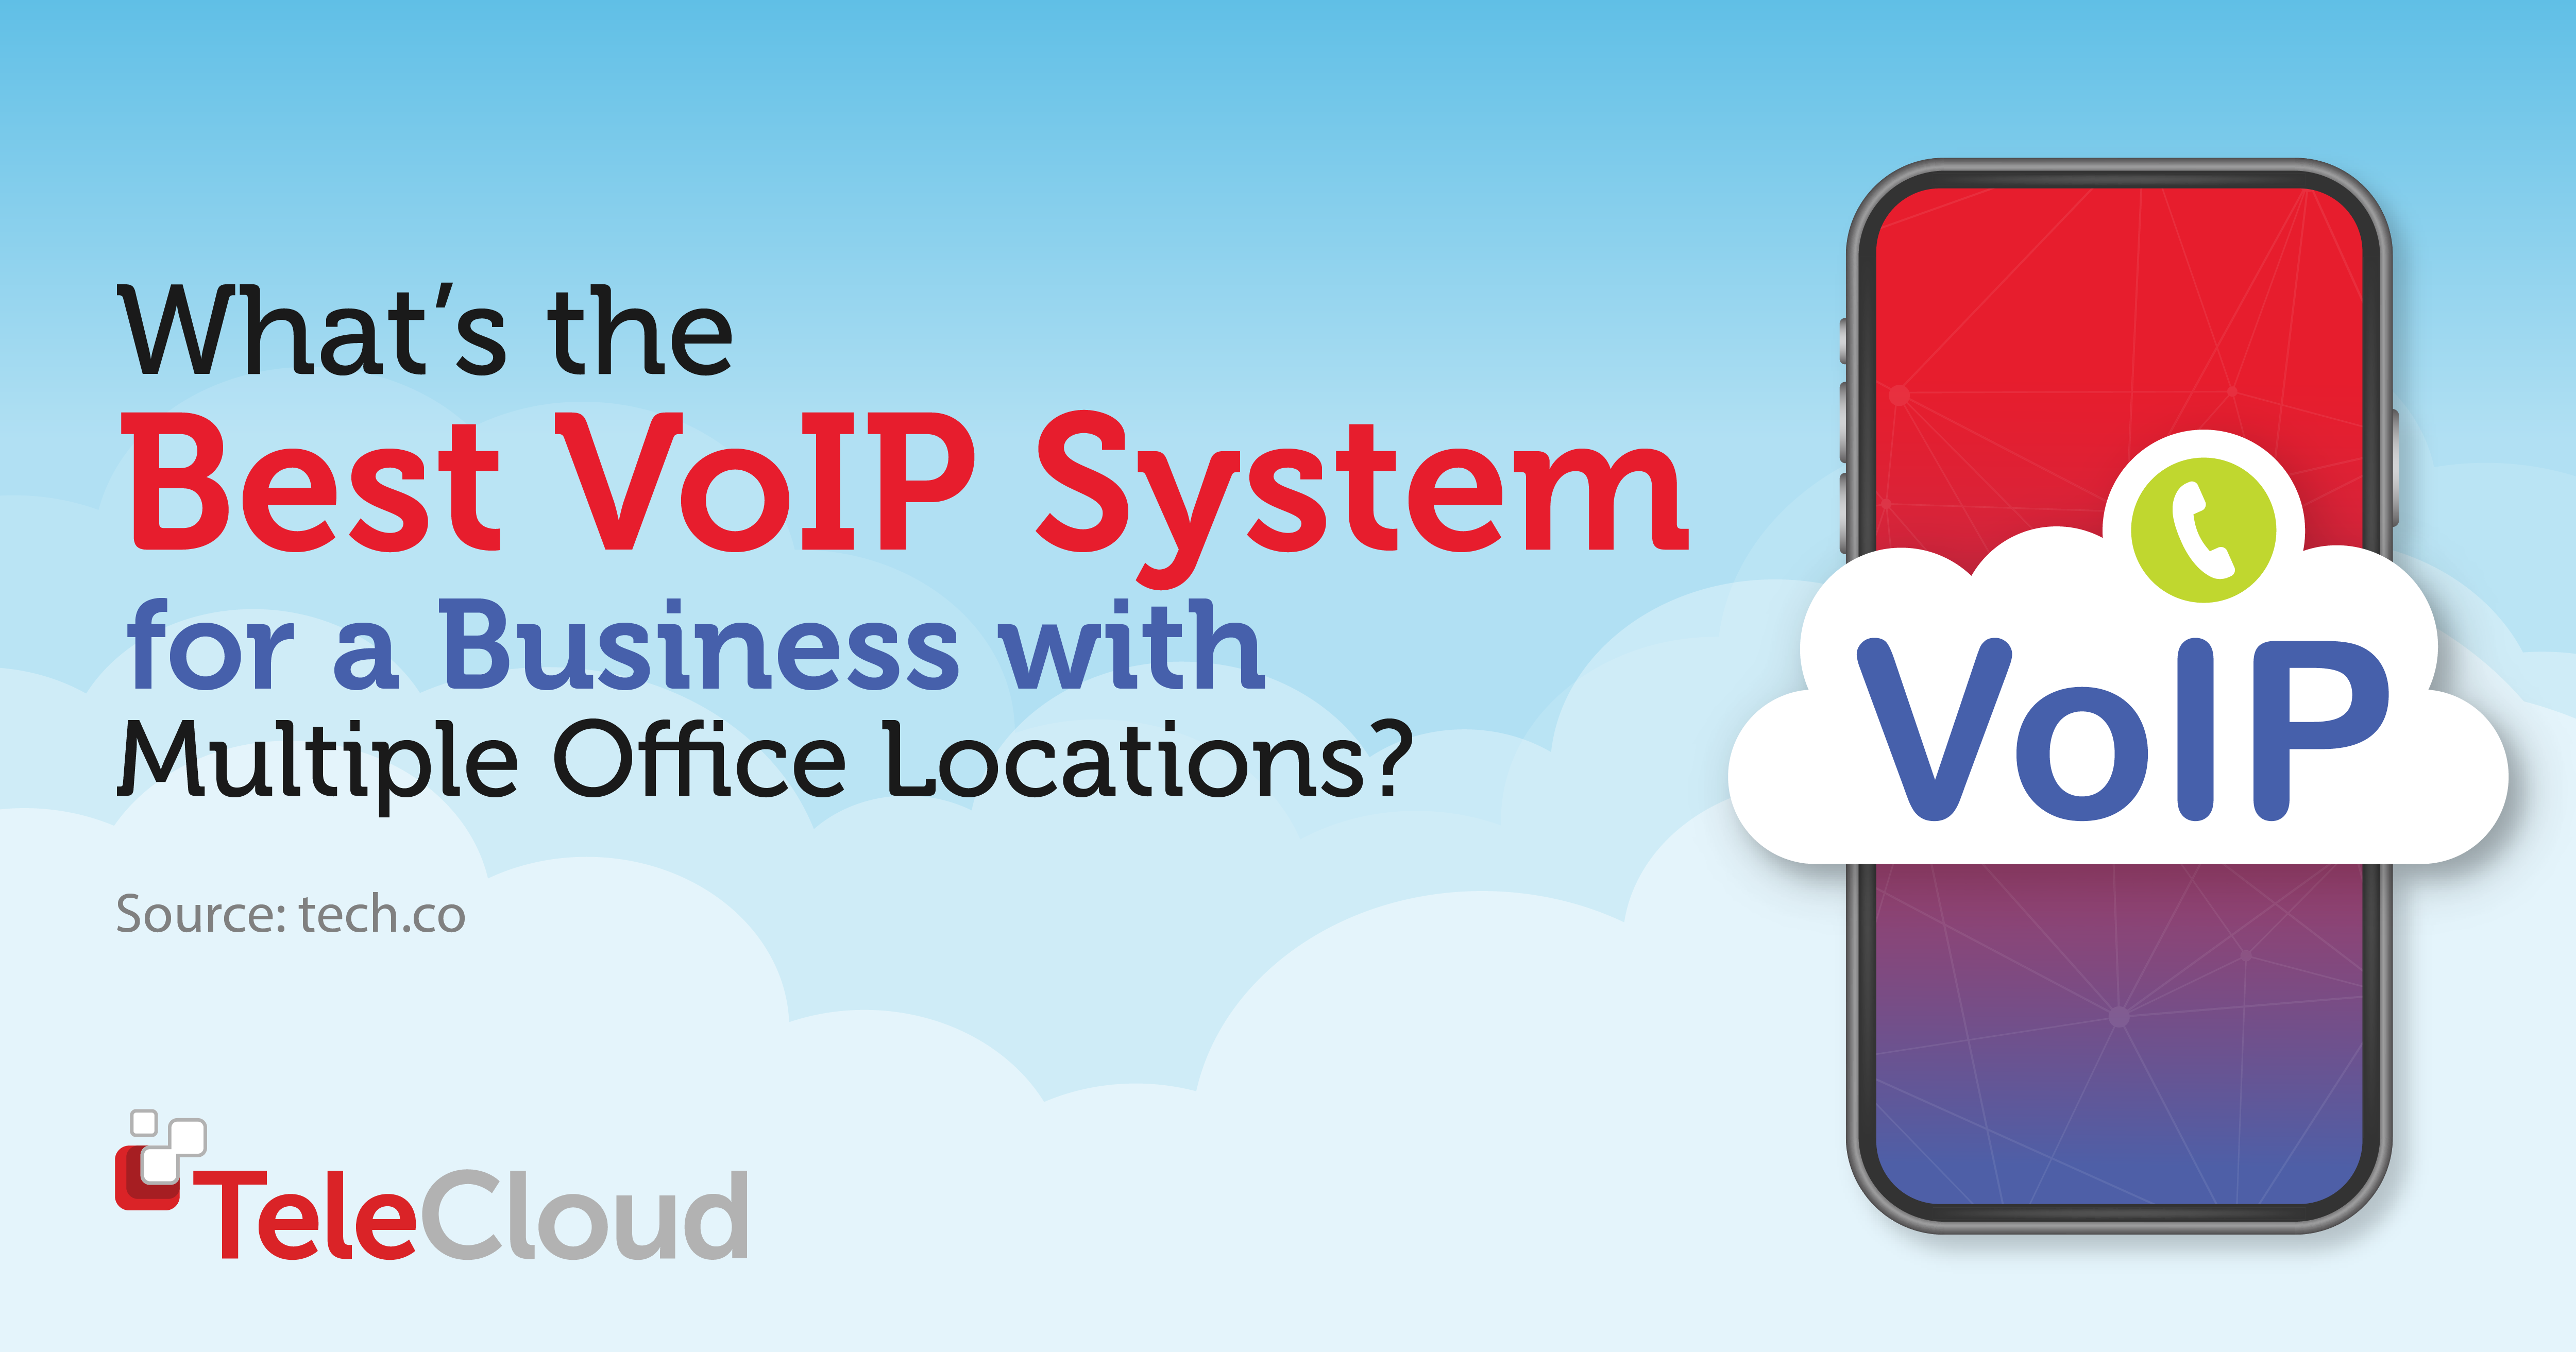 What’s the Best VoIP System for a Business with Multiple Office Locations?